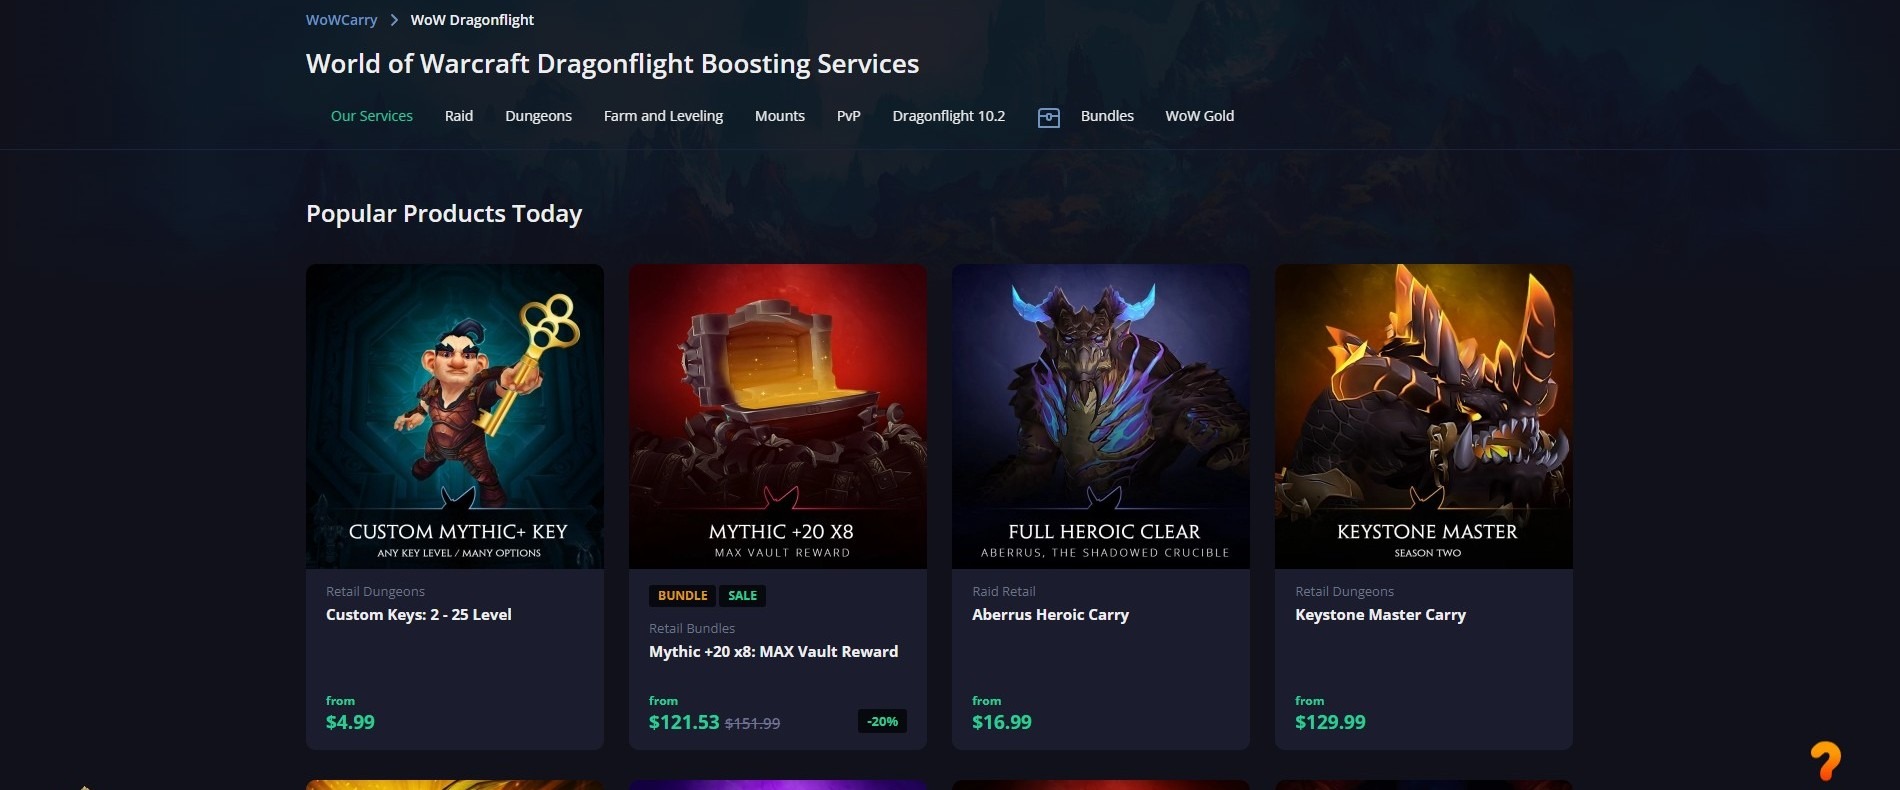 WowCarry is a site that can "wow" you with its offers